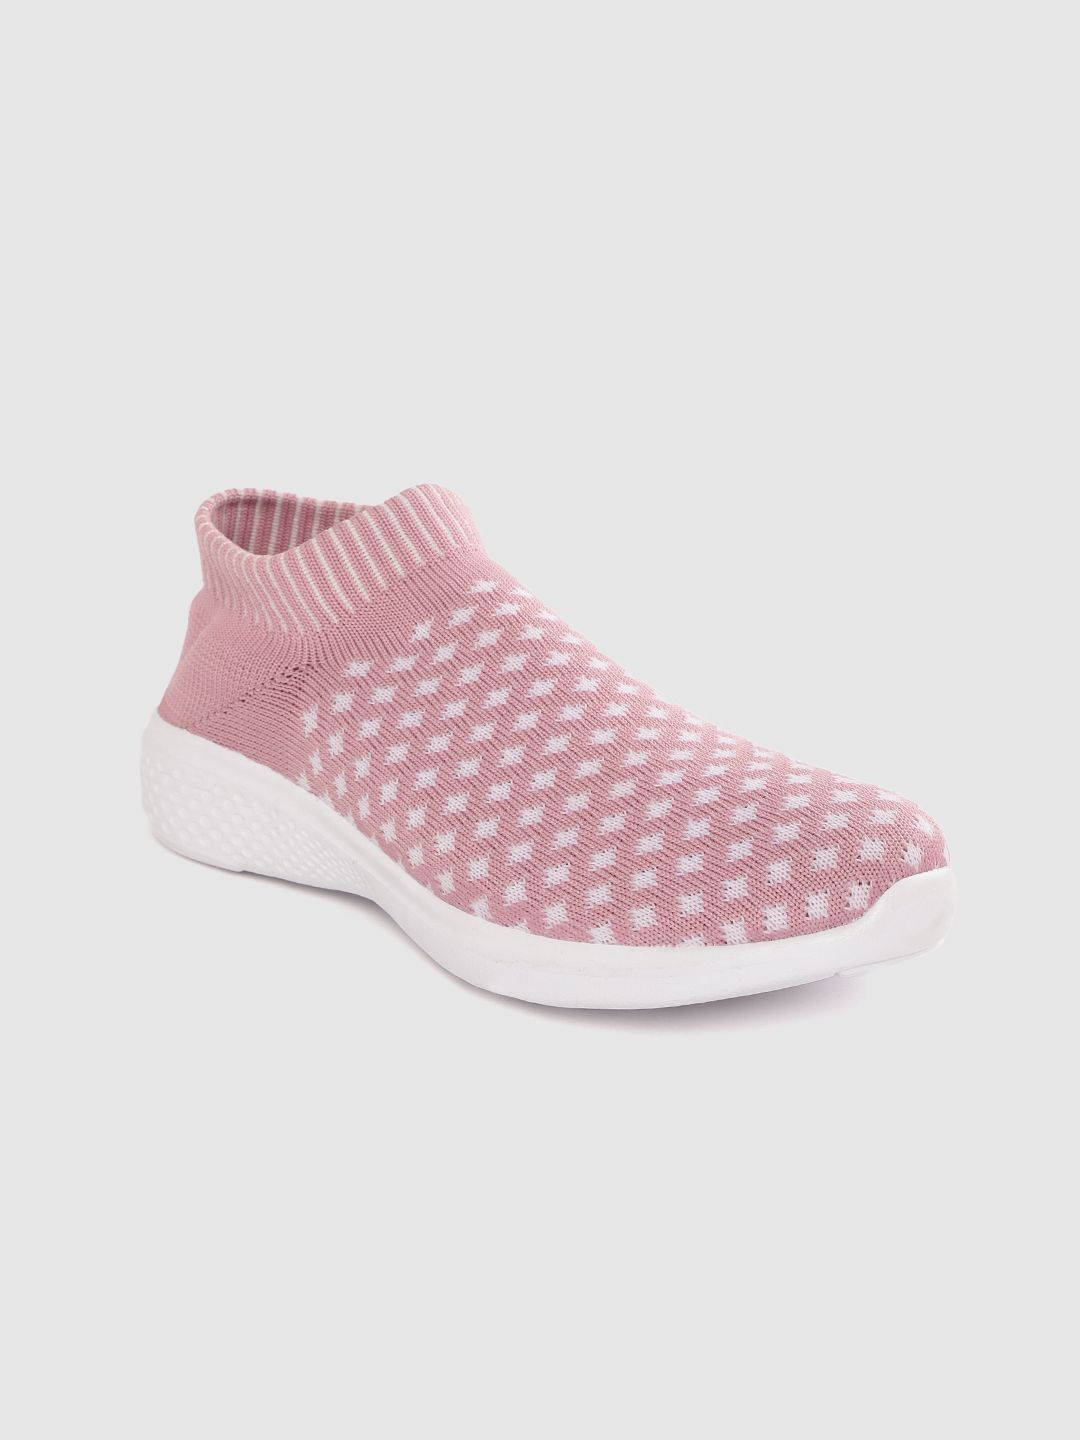 TRASE Women Pink & White Geometric Woven Design Running Shoes Price in India